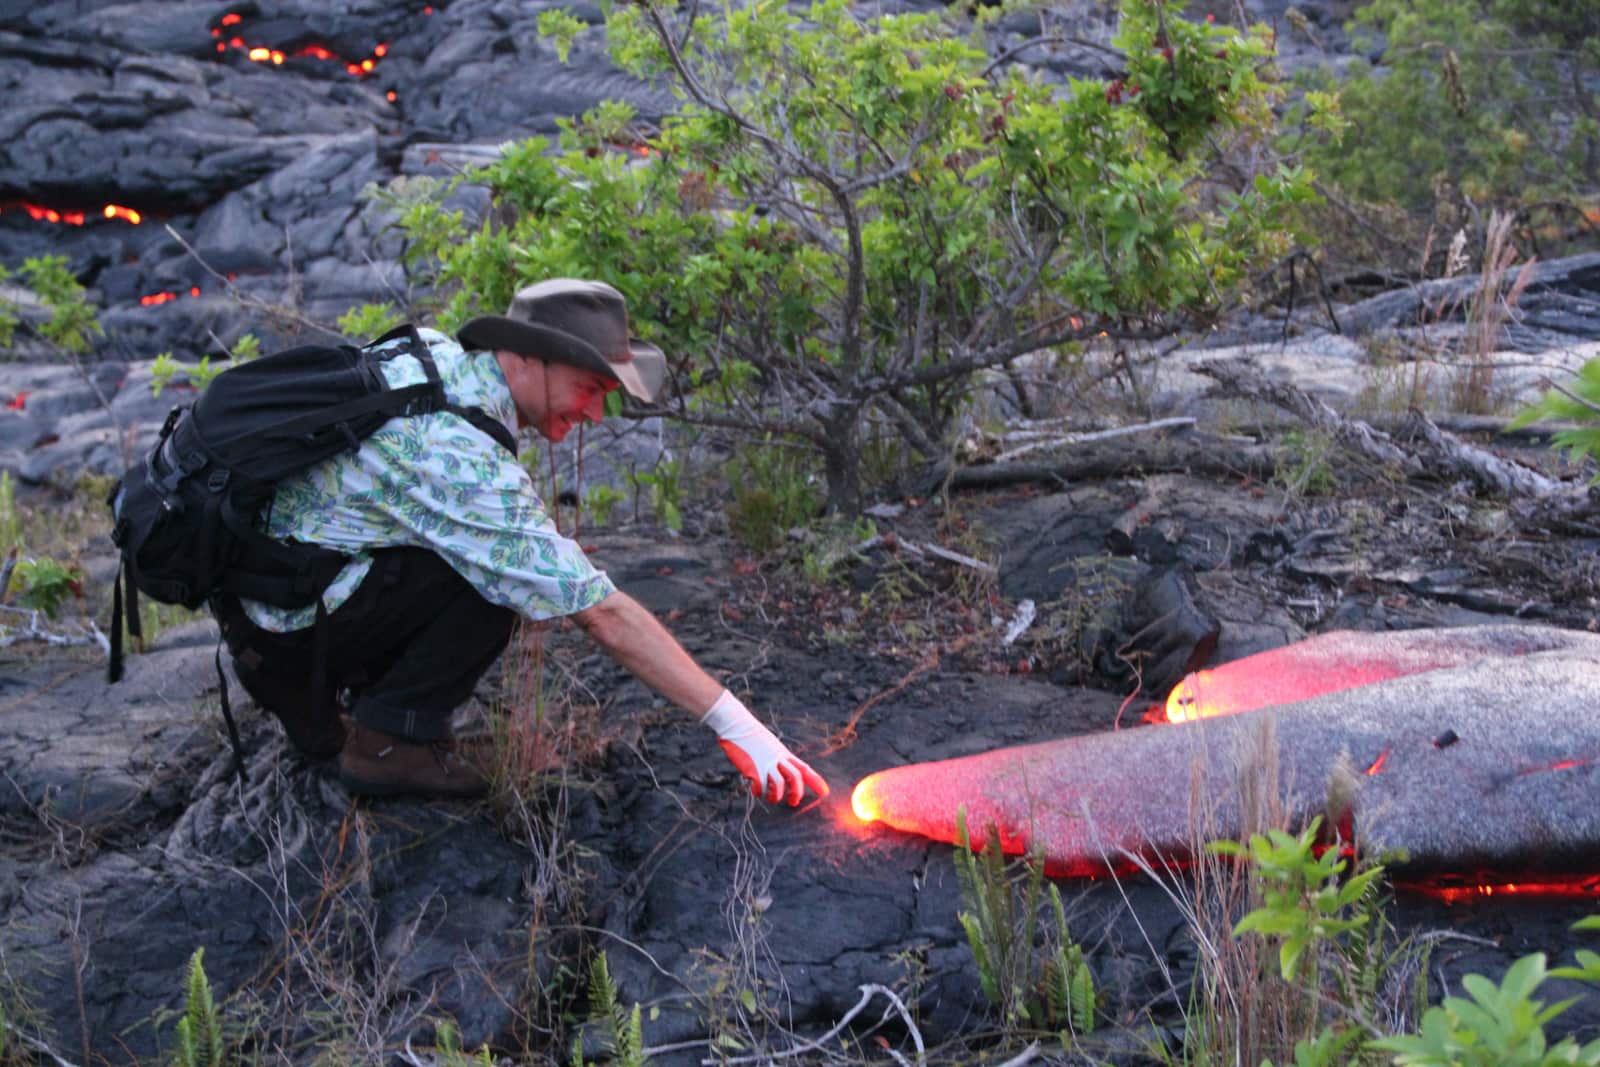 Man with glove on right hand reaching for hot lava